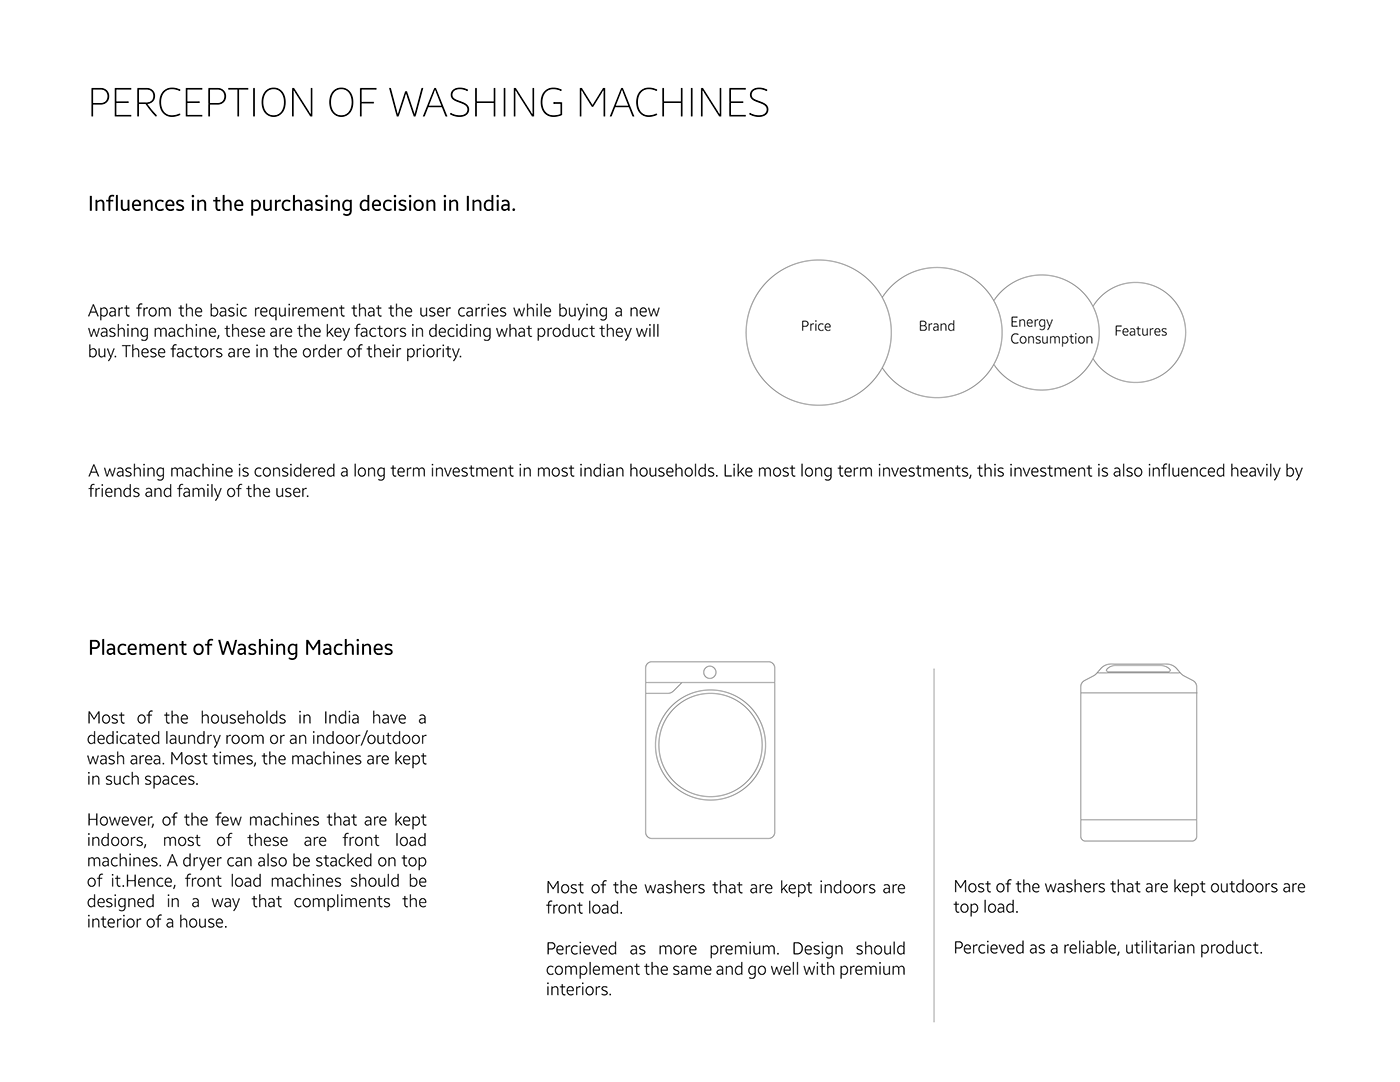 3D Consumer appliance consumer electronics Fusion360 industrial design  IoT product design  Samsung Smart Home Washing machine